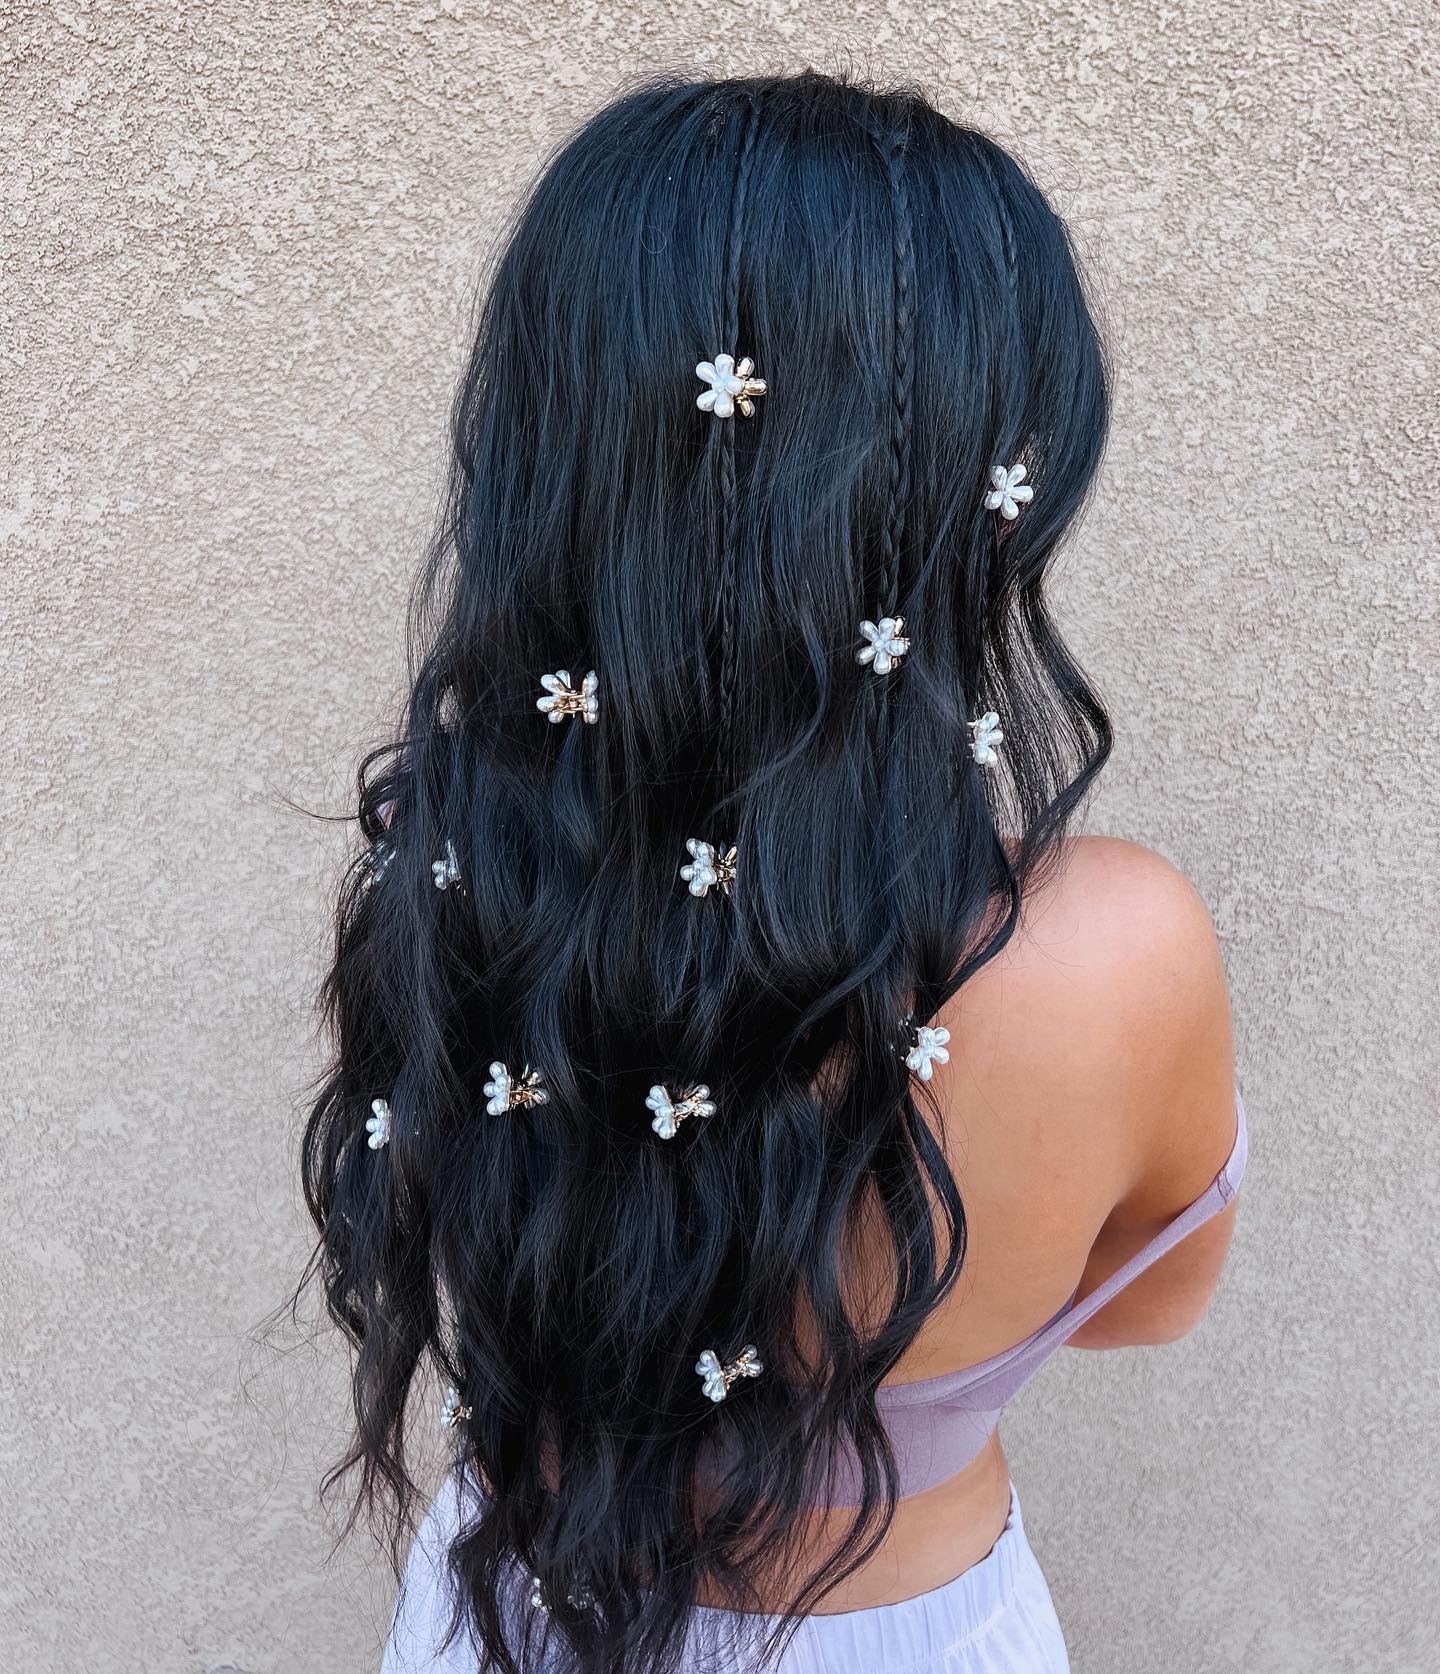 5 Easy & Quick Flower Hairstyles for weddings